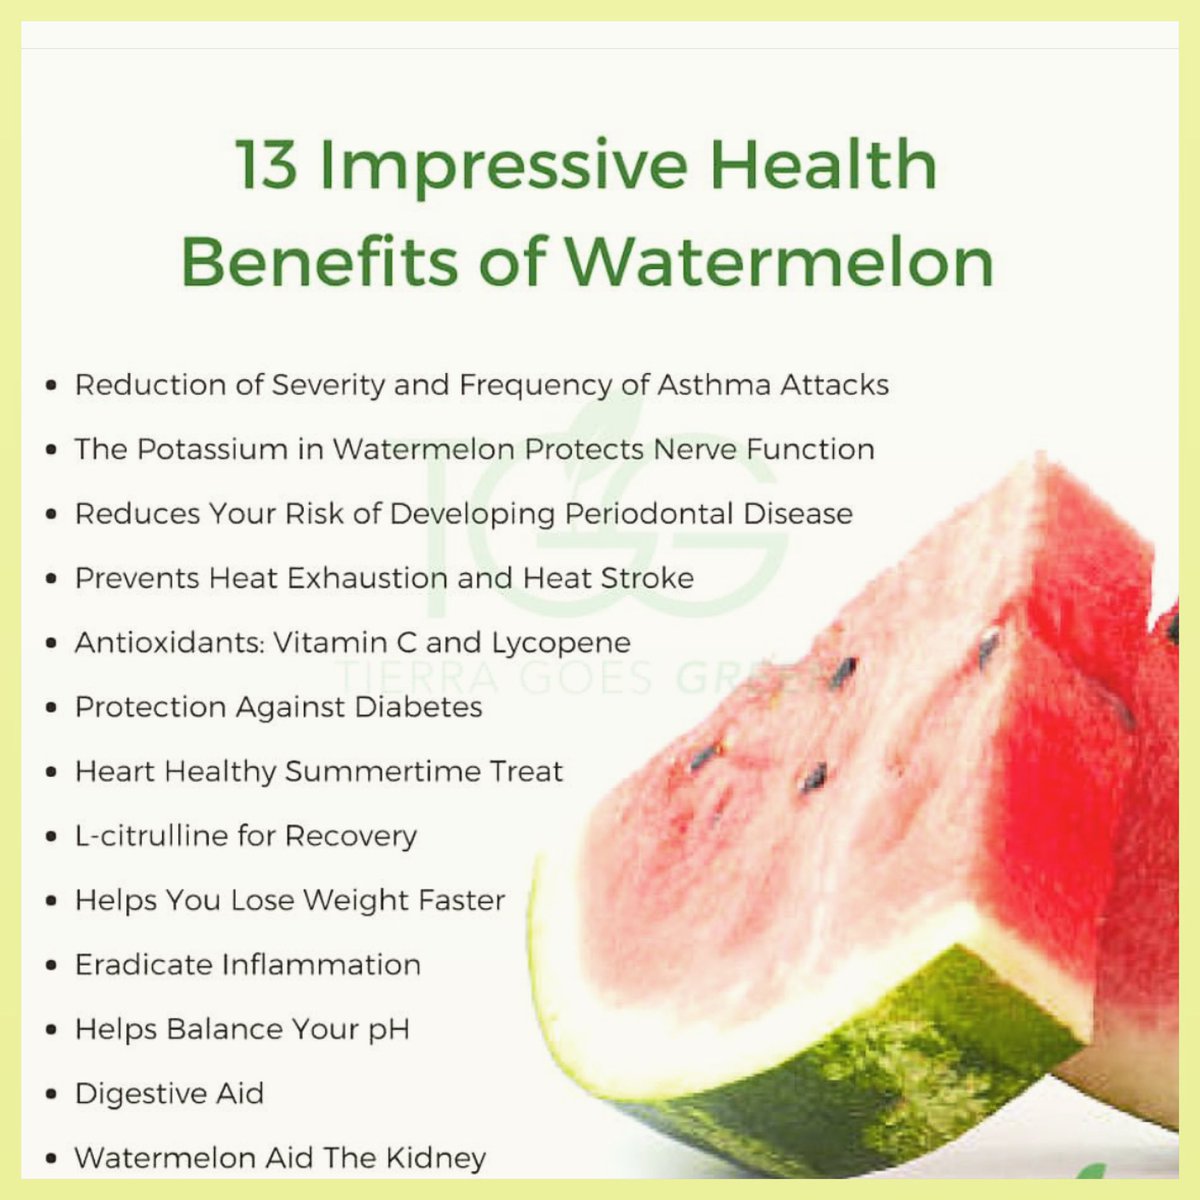 🍉Did you know about the benefits of Watermelon 🍉 👅💦 It contains only 46 calories per cup but is high in vitamin C, vitamin A & many healthy plant compounds🍉#SheSmiles®️#KiaCakes™️#BenefitsOfWatermelon 🍉🍉